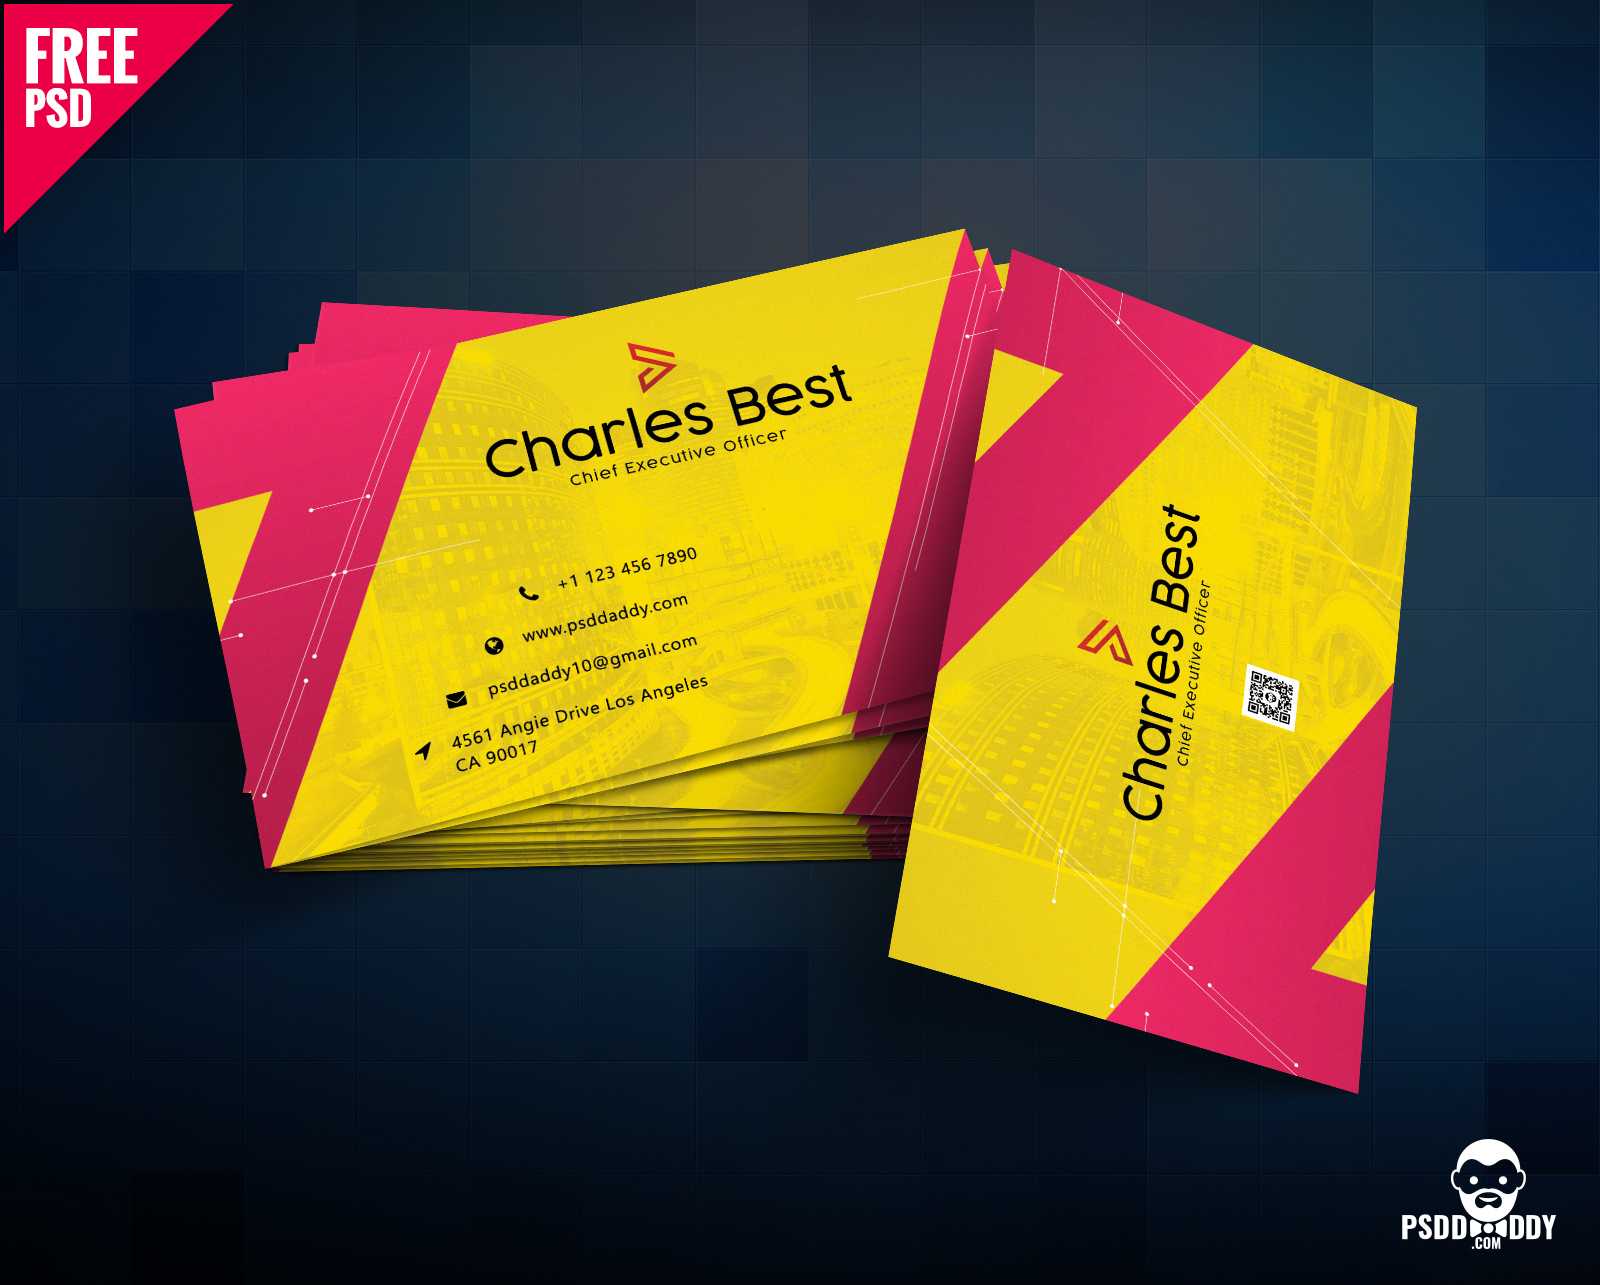 Download] Creative Business Card Free Psd | Psddaddy For Photoshop Name Card Template